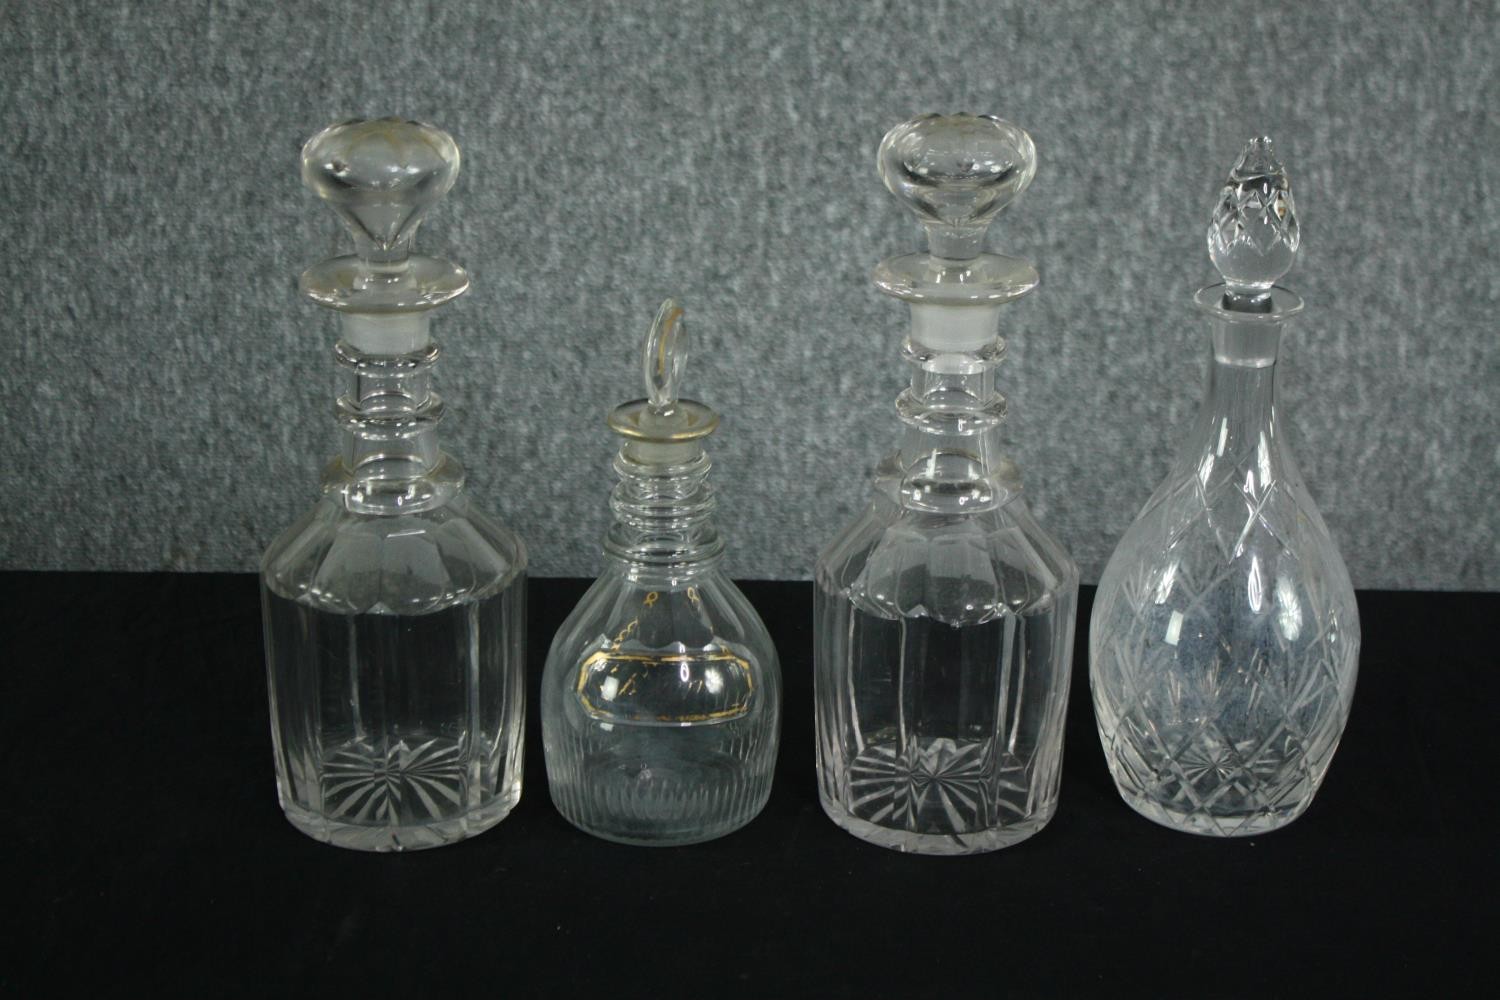 A collection of four early twentieth century cut glass decanters complete with their stoppers. One